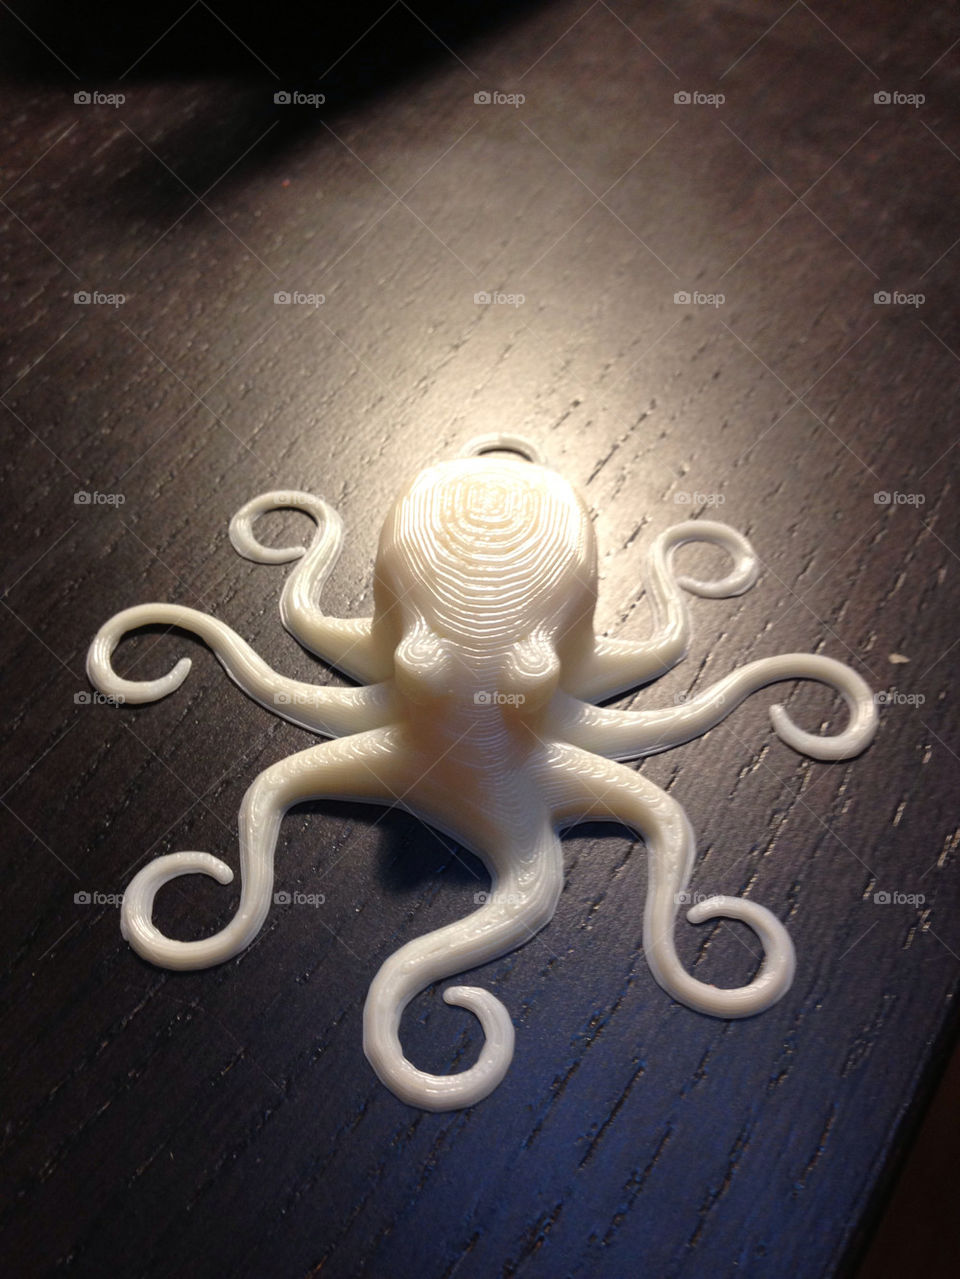 Octopus printed from a 3d printer